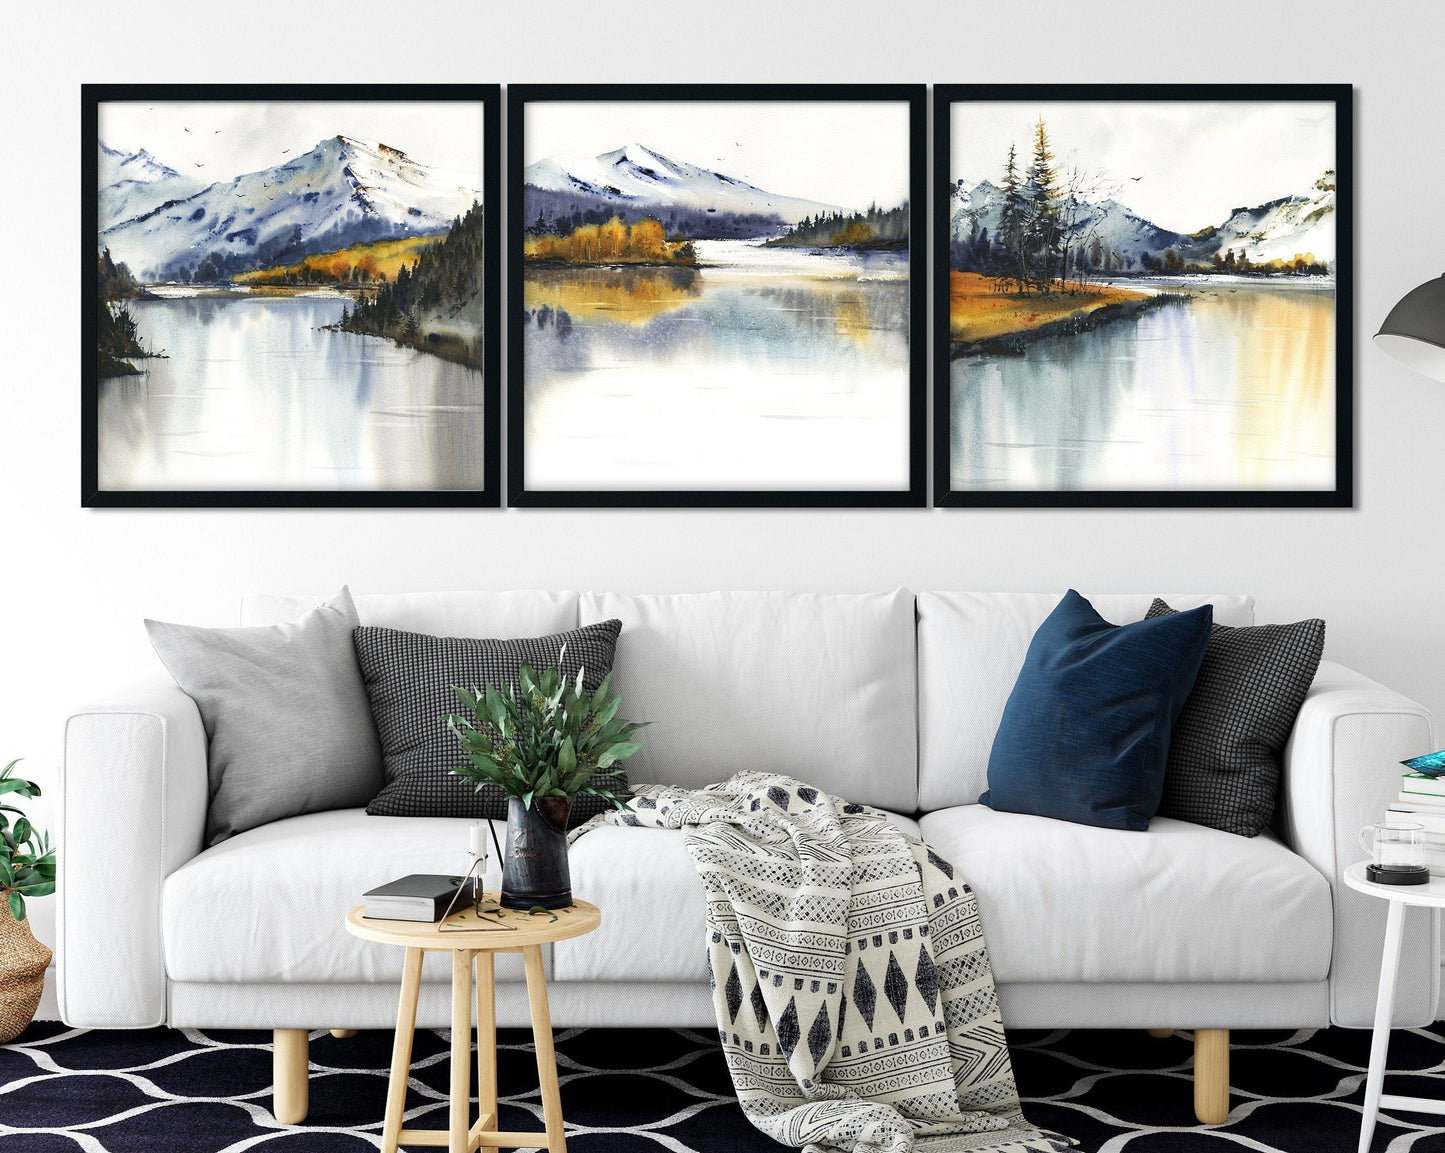 Nature Art Set Of 3 Square Prints, Fall Landscape Wall Art, Mountain Lake Painting on Canvas, Giclee Print, Home Decor